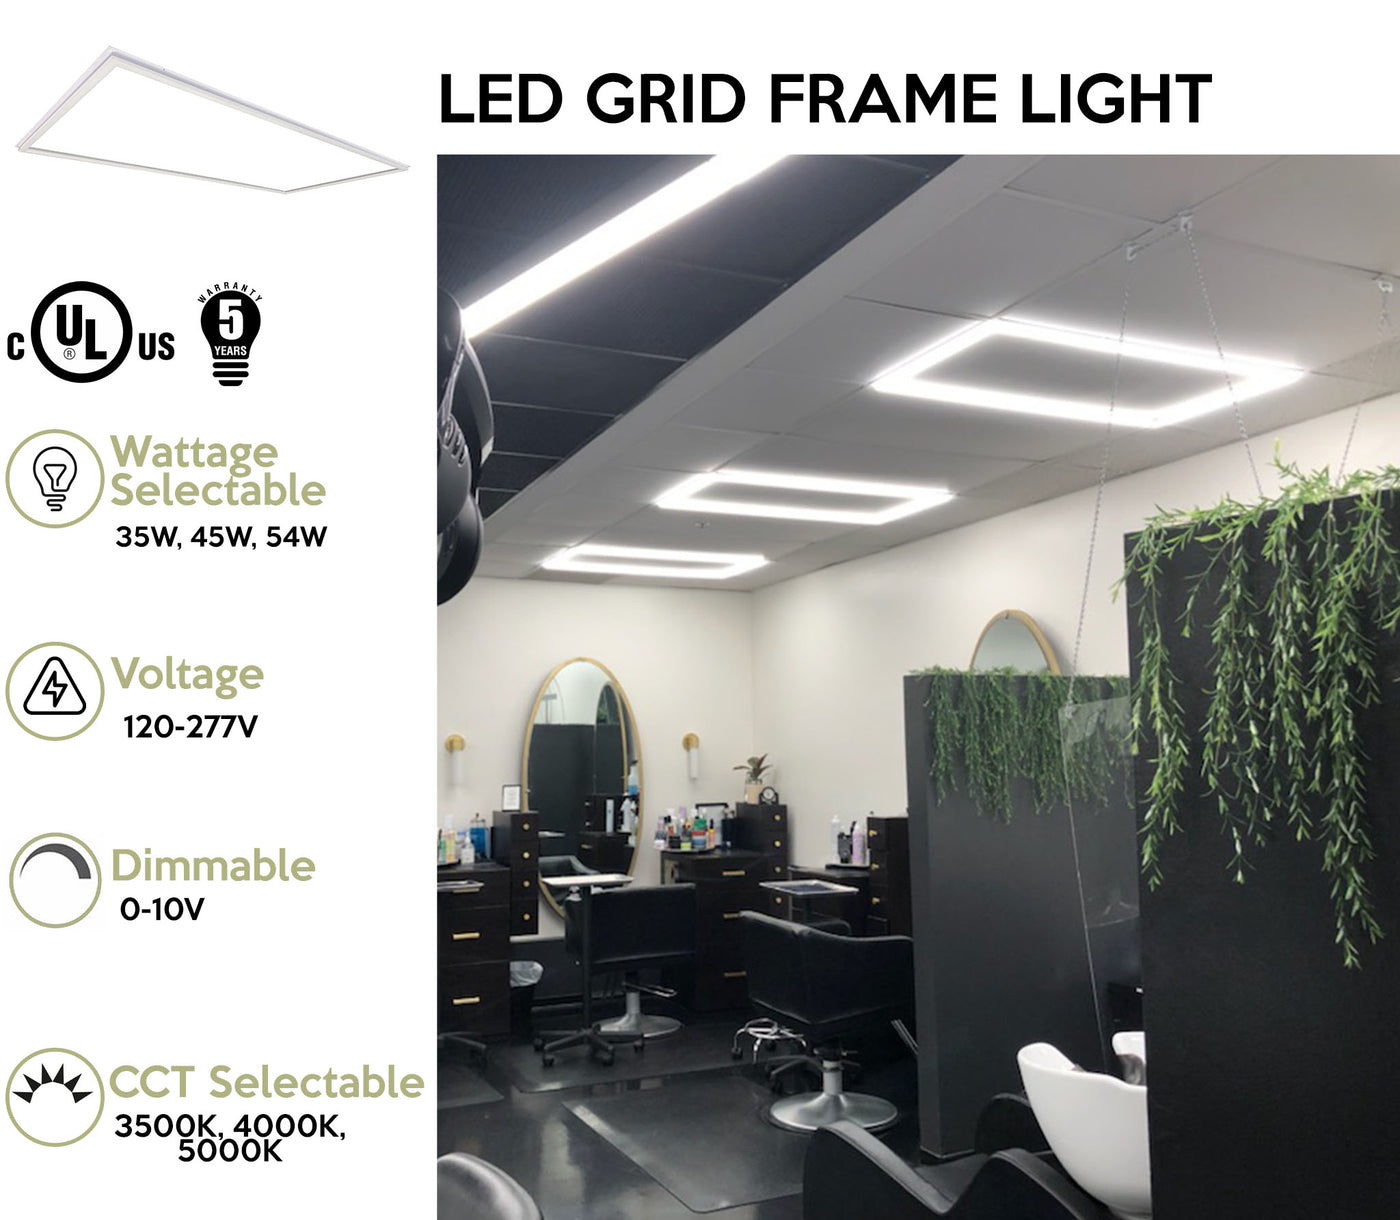 2 x 4 LED Grid Frame Light, 5400 Lumens, Selectable Wattage and CCT, 120-277V